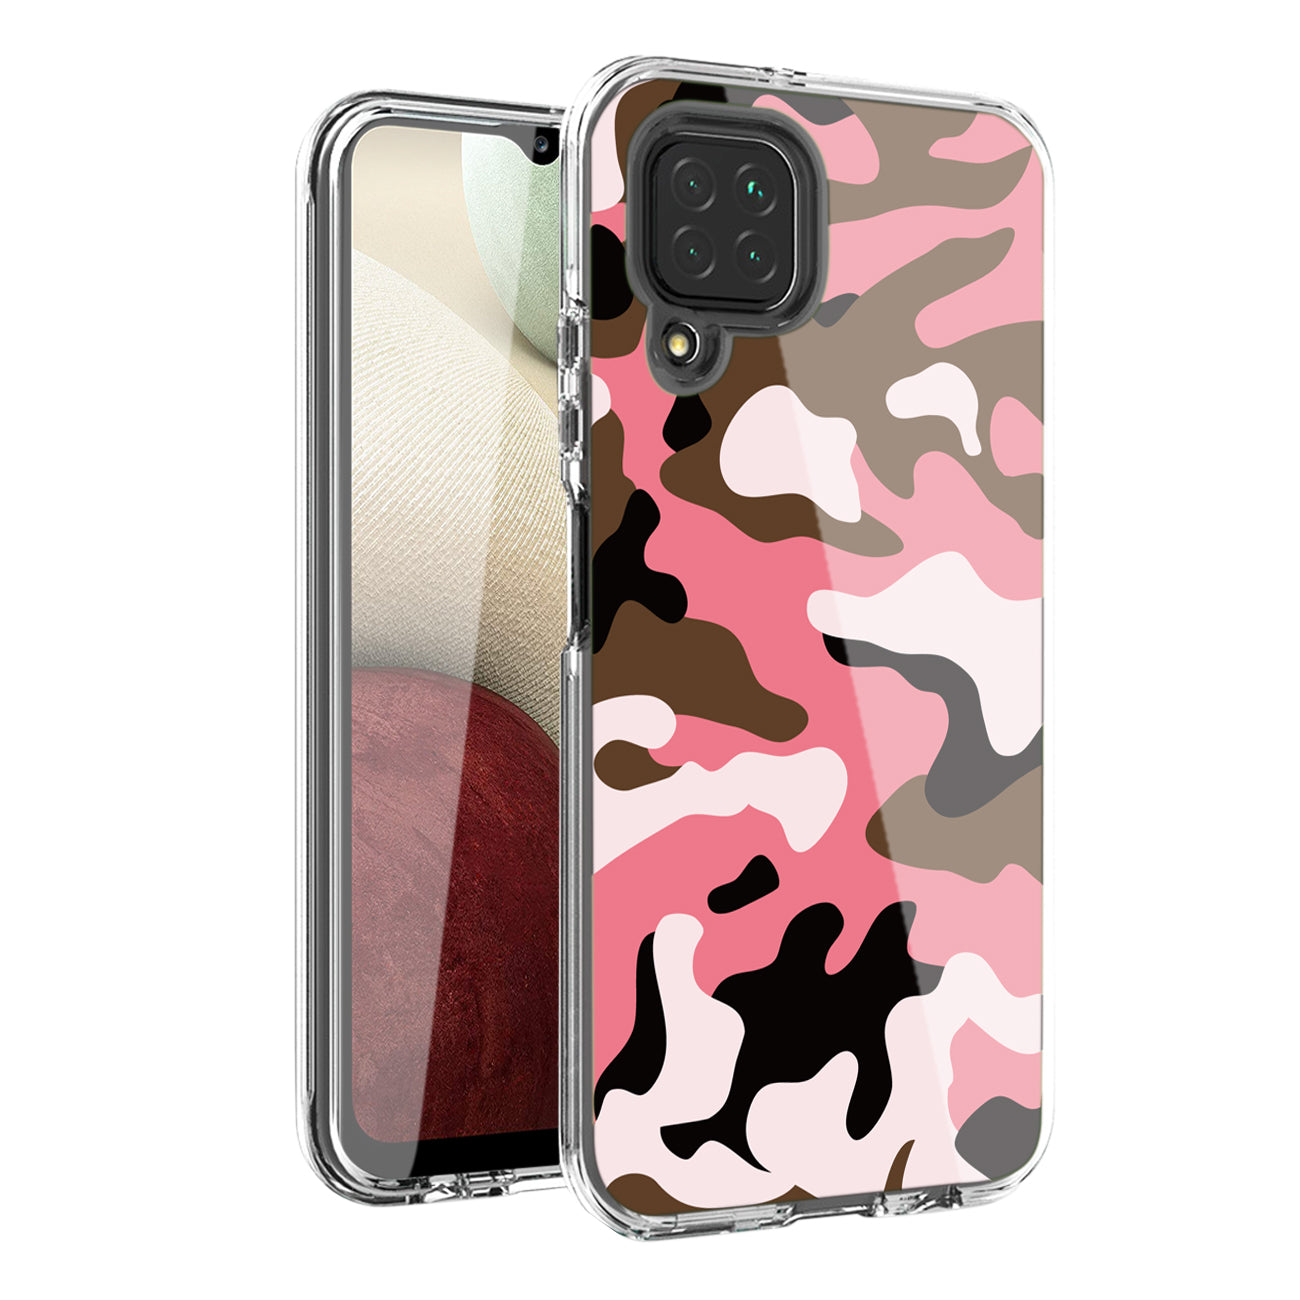 Camouflage Dual Layer Hybrid Hard & Soft TPU Rubber Case for SAMS GALAXY A12 5G In Pink